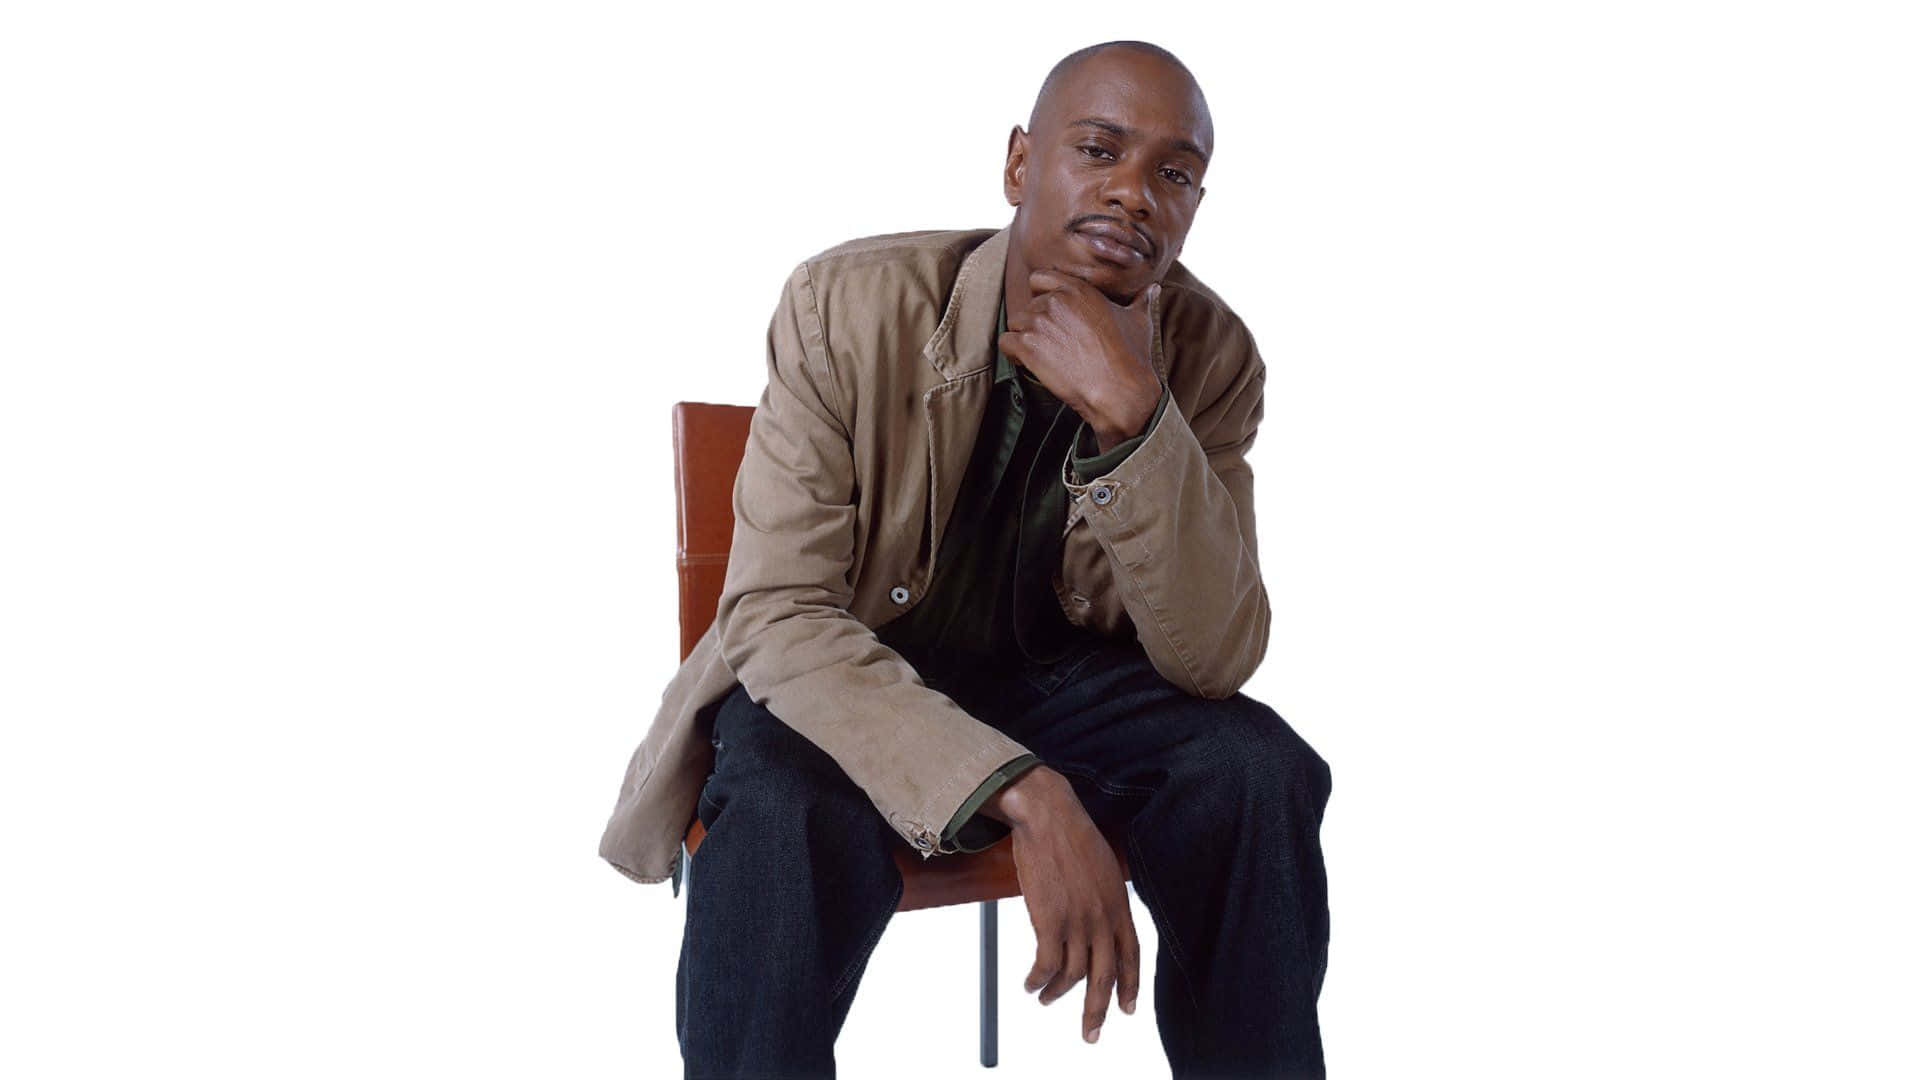 Dave Chappelle Onstage Delivering An Impactful Comedy Performance